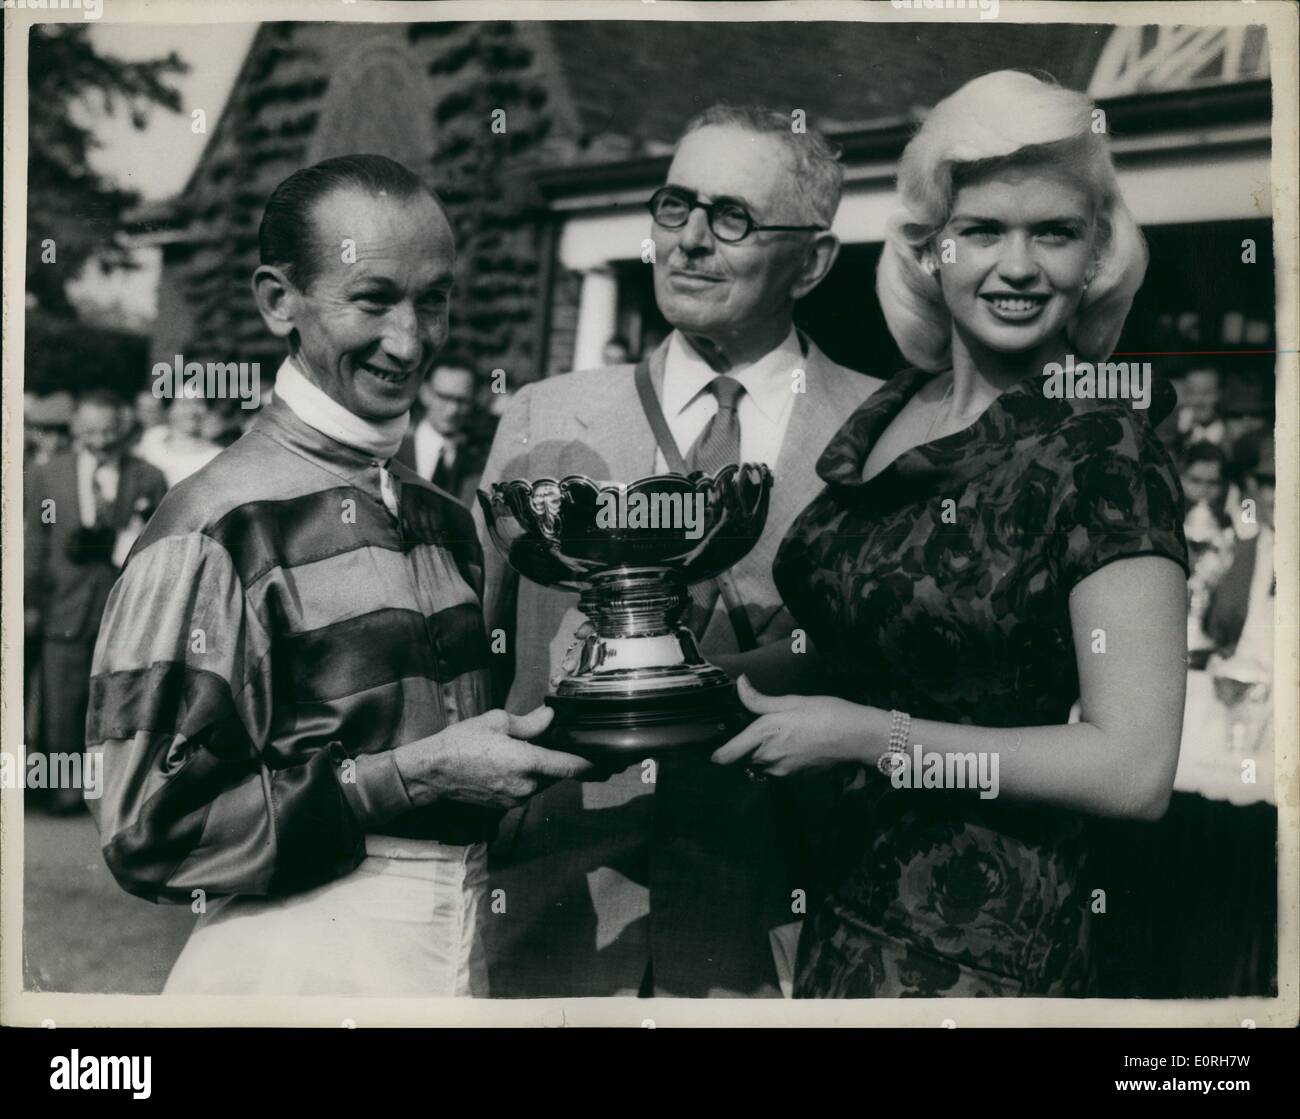 Sep. 09, 1959 - Variety Club race meeting at Sandown Park. Stars attend: Many famous stars this afternoon attended the race meeting at Sandown Park, sponsored by the Variety Club of Great Britain, in aid of Children's charities. Photo Shows Jayne Mansfield presents the Gold Cup to Australian jockey George Moore, who received it on behalf of Prince Aly Khan, after the latter's horse Sallymount, ridden by George Moore, had won the Lyons Maid Stakes at Sandown Park today. Stock Photo